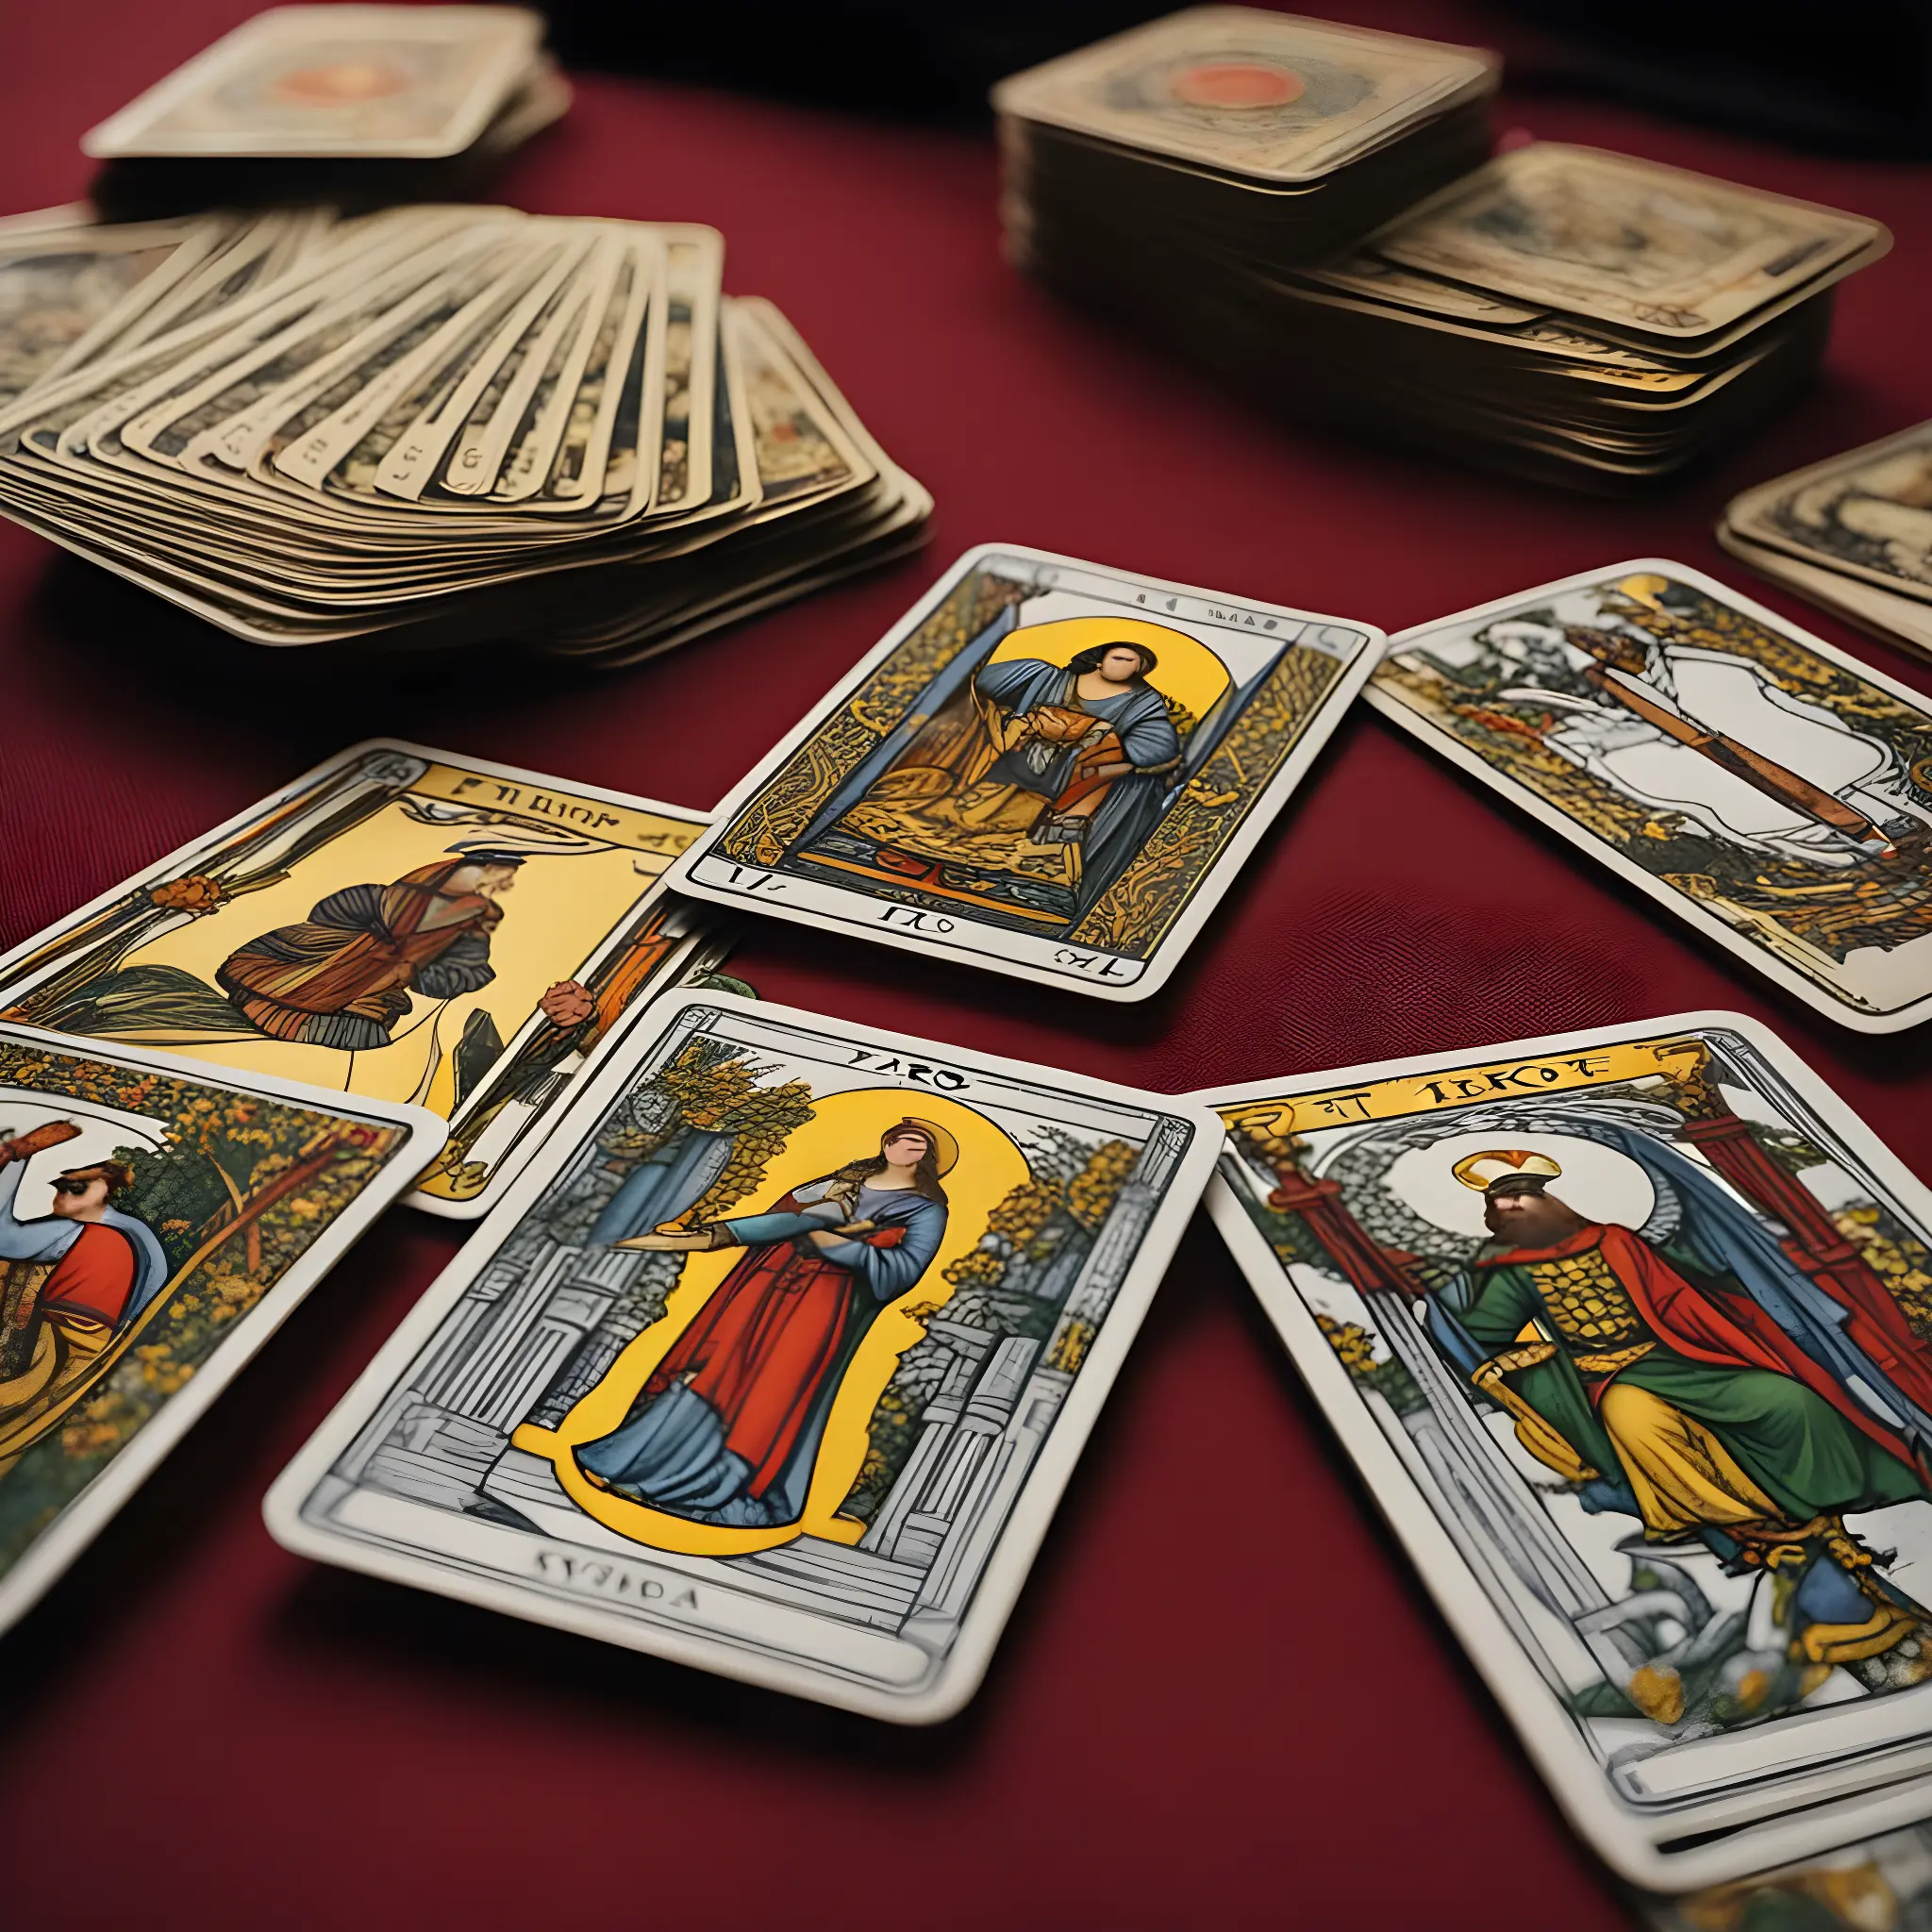 A well-organized tarot card deck, showcasing the complexity of its symbolism.